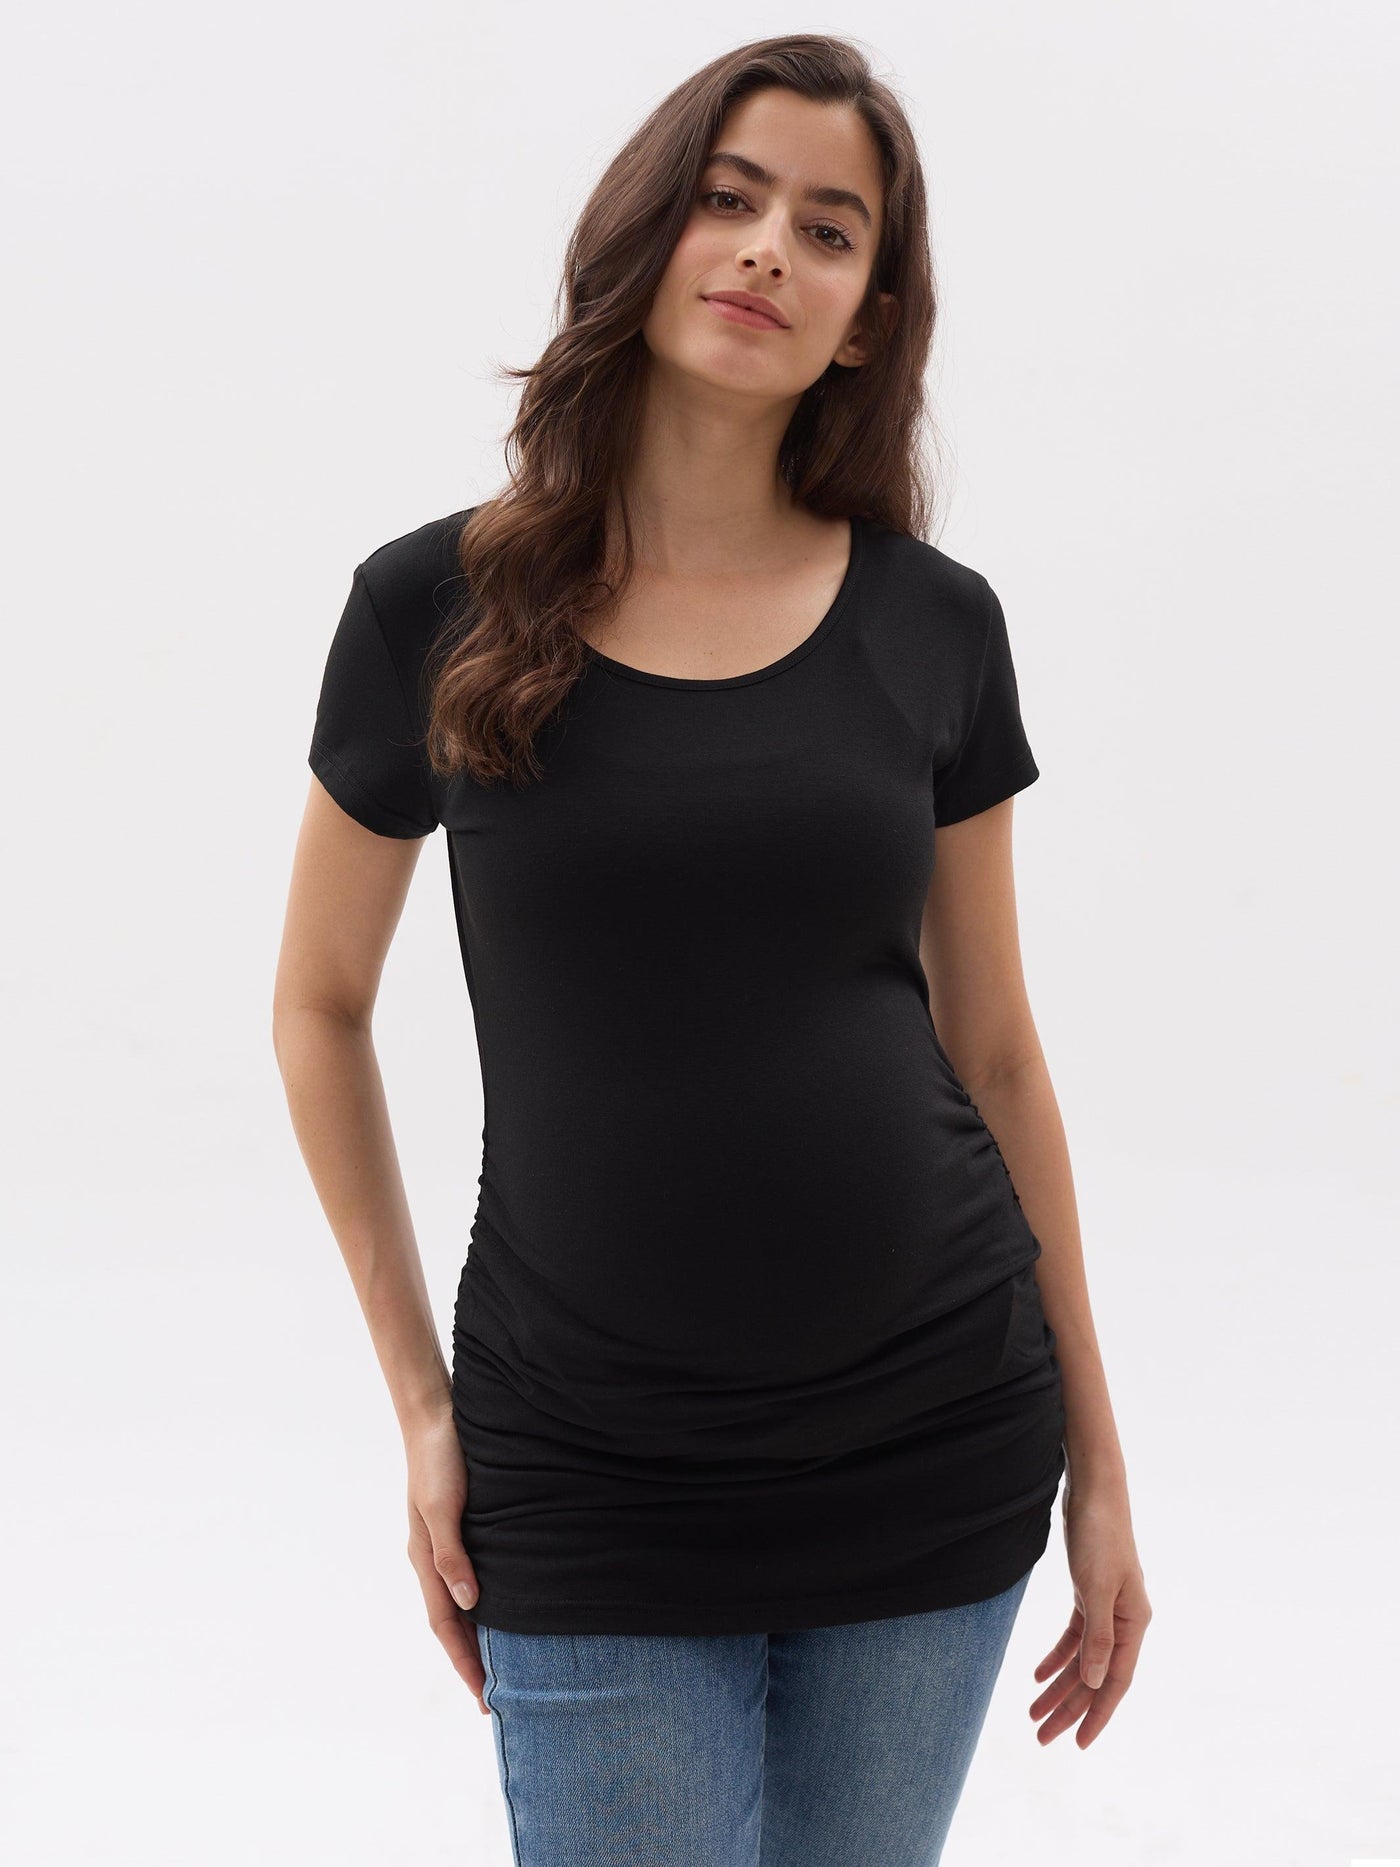 Black Basic Scoopneck Ruched Fitted Maternity Top - Leolace